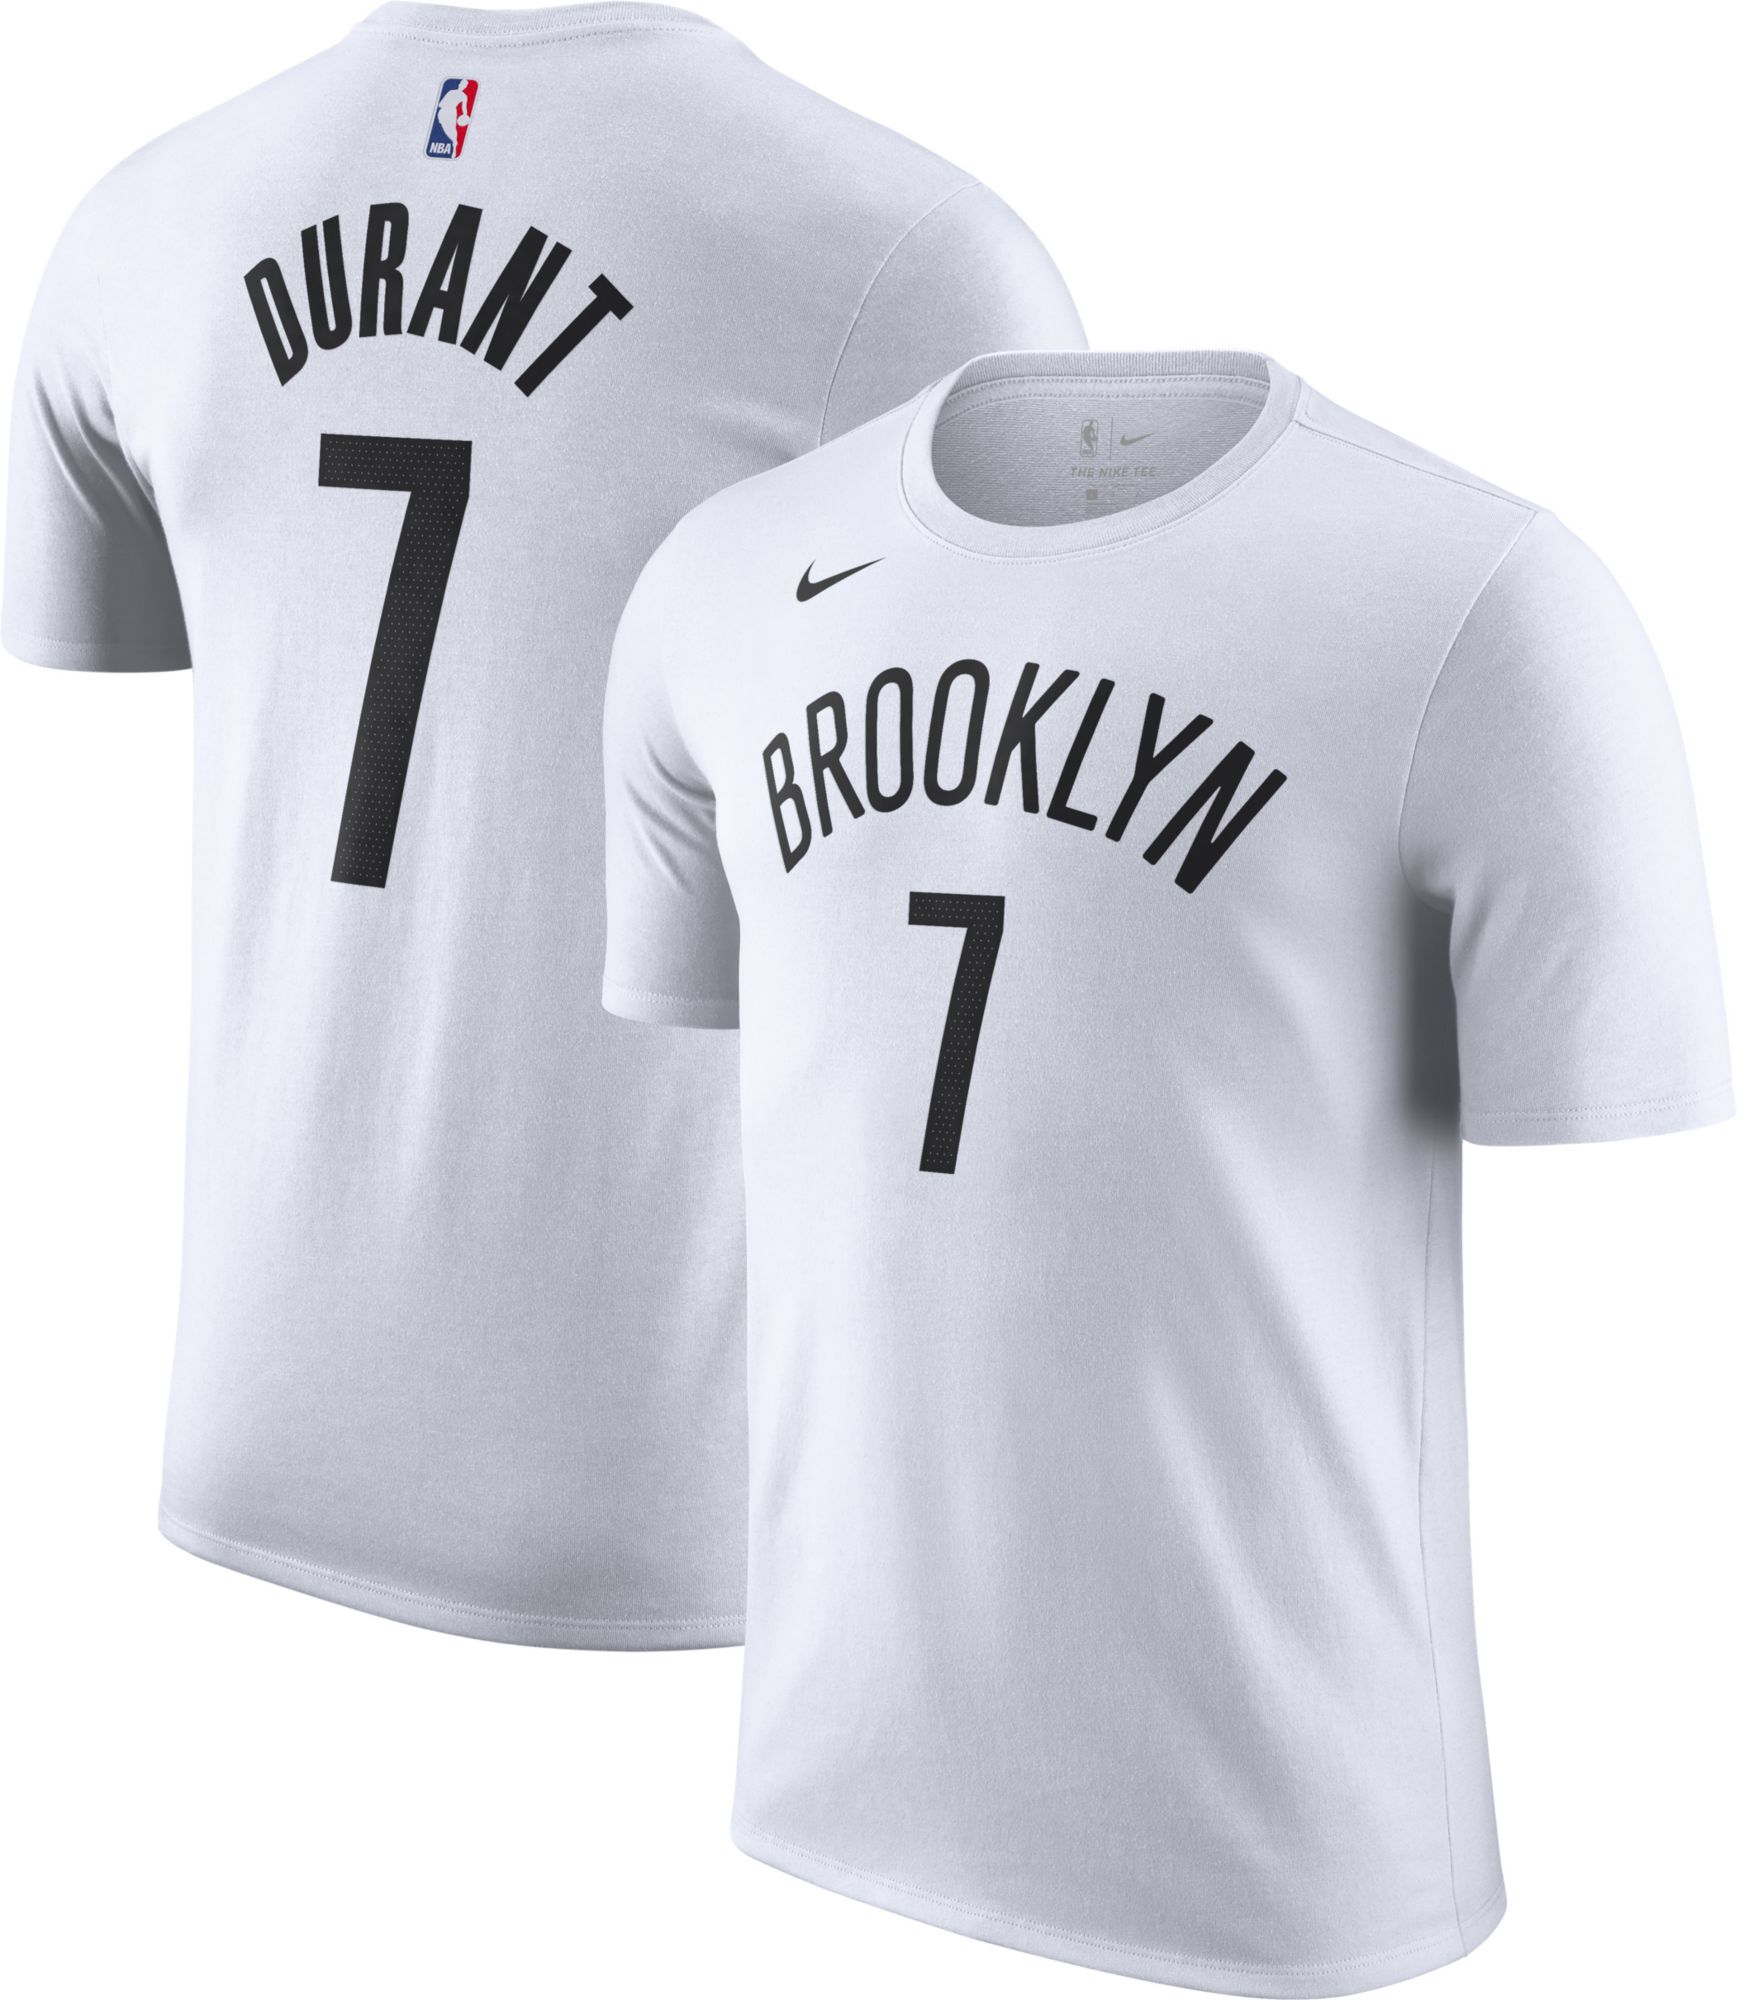 Nike Youth Brooklyn Nets Kevin Durant #7 Cotton White T-Shirt